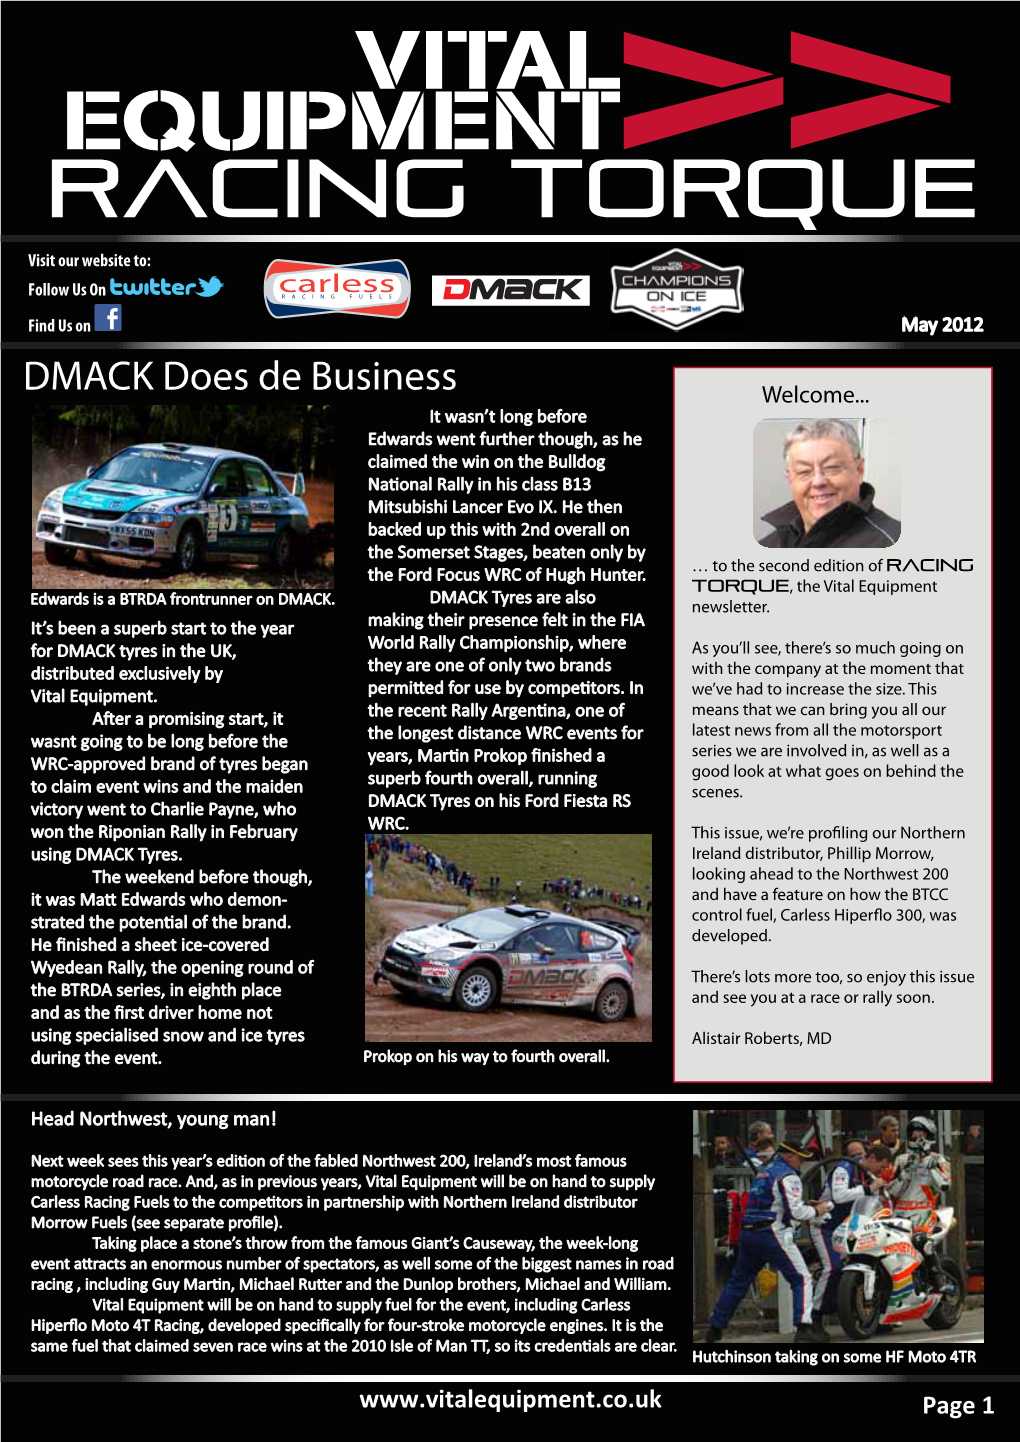 DMACK Does De Business Welcome